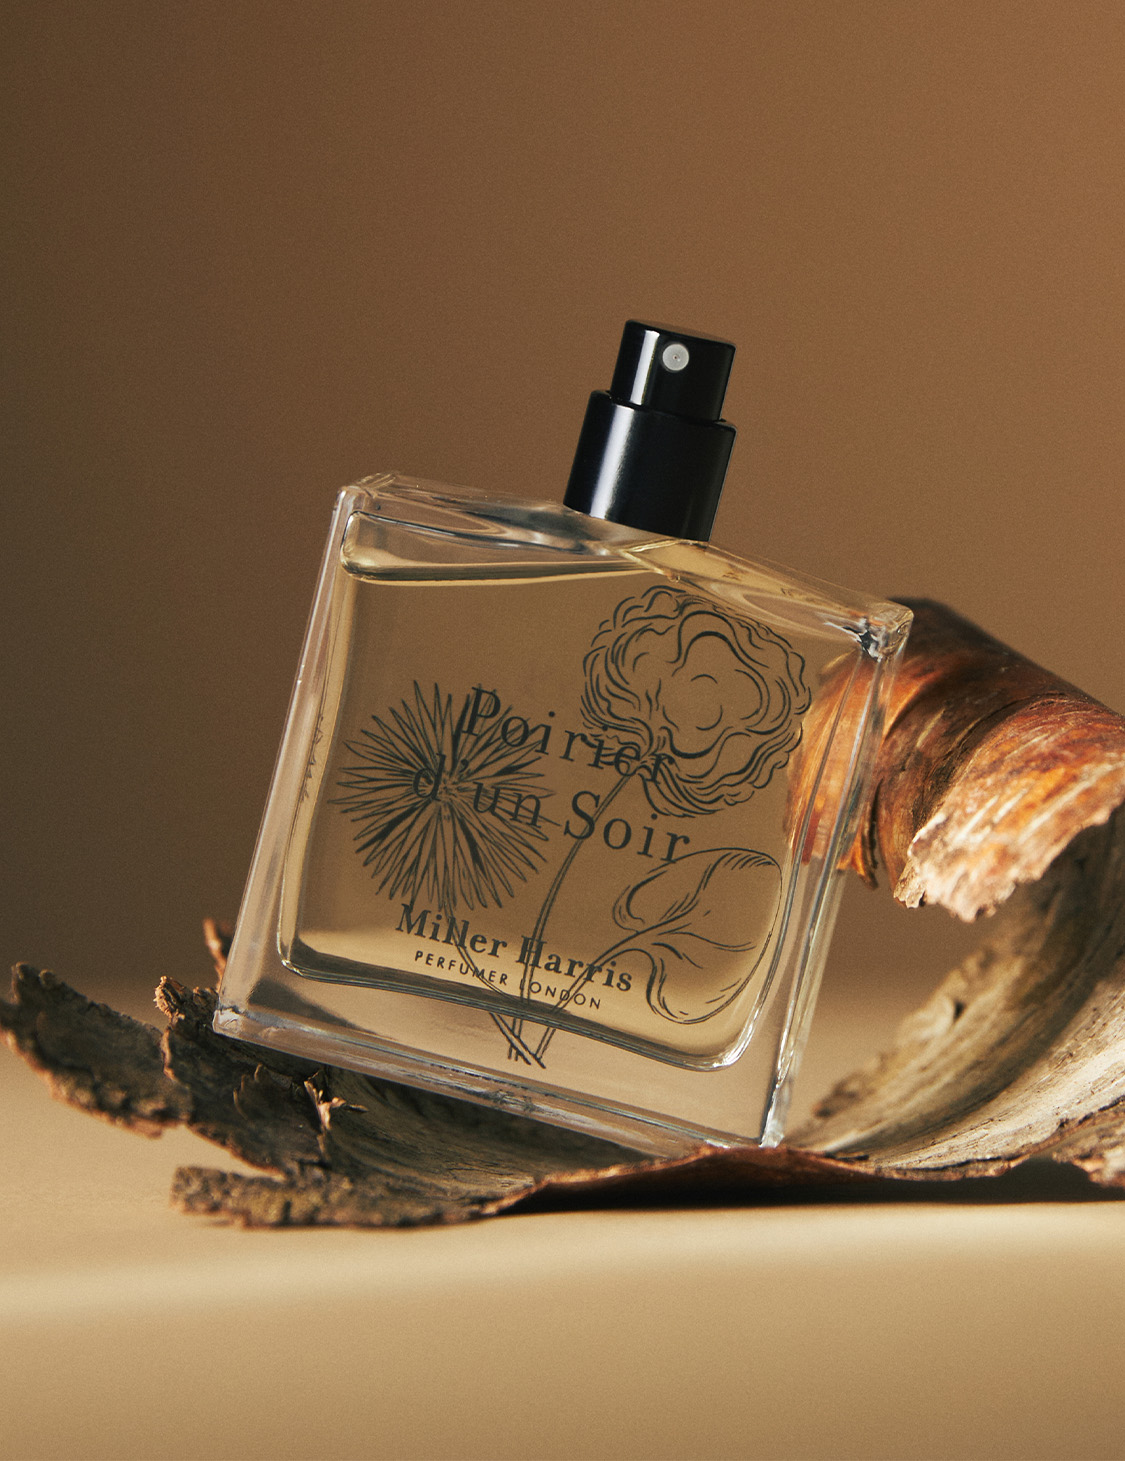 For a stunning fragrance to carry you into fall (or any season for